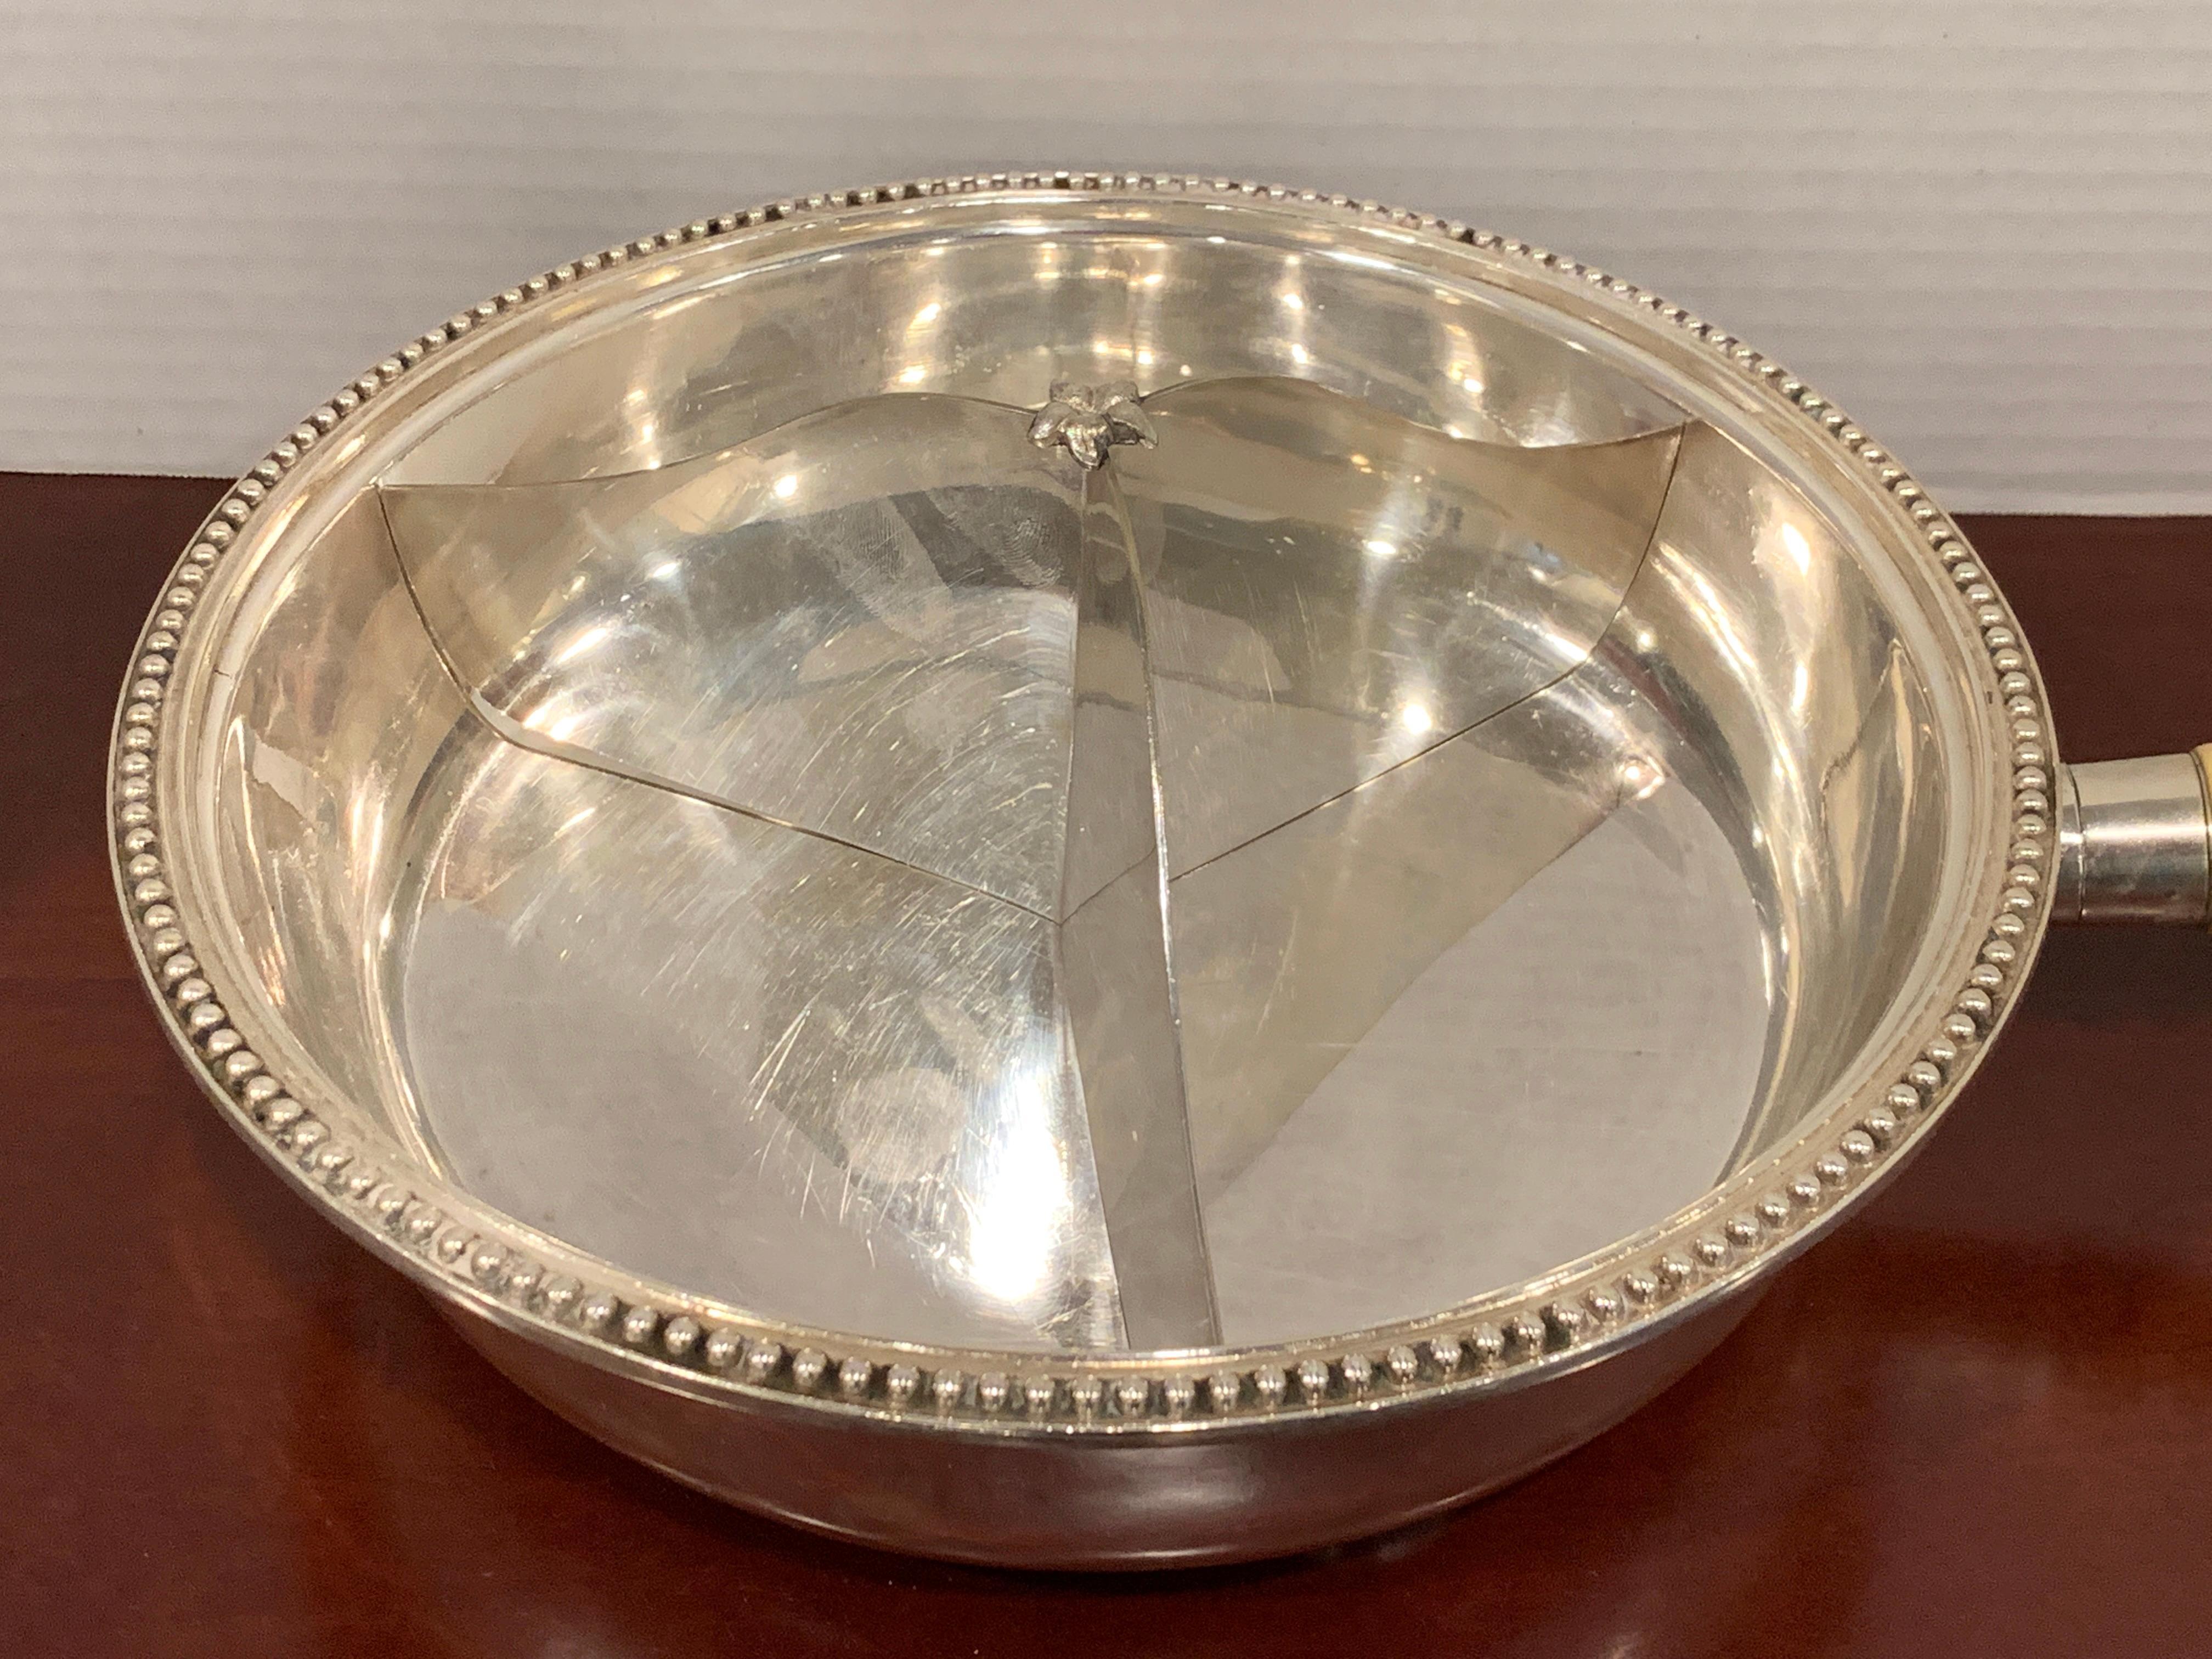 Antique English Silver Plated Warming Supper Dish by Henry Wilkinson & Co. For Sale 1